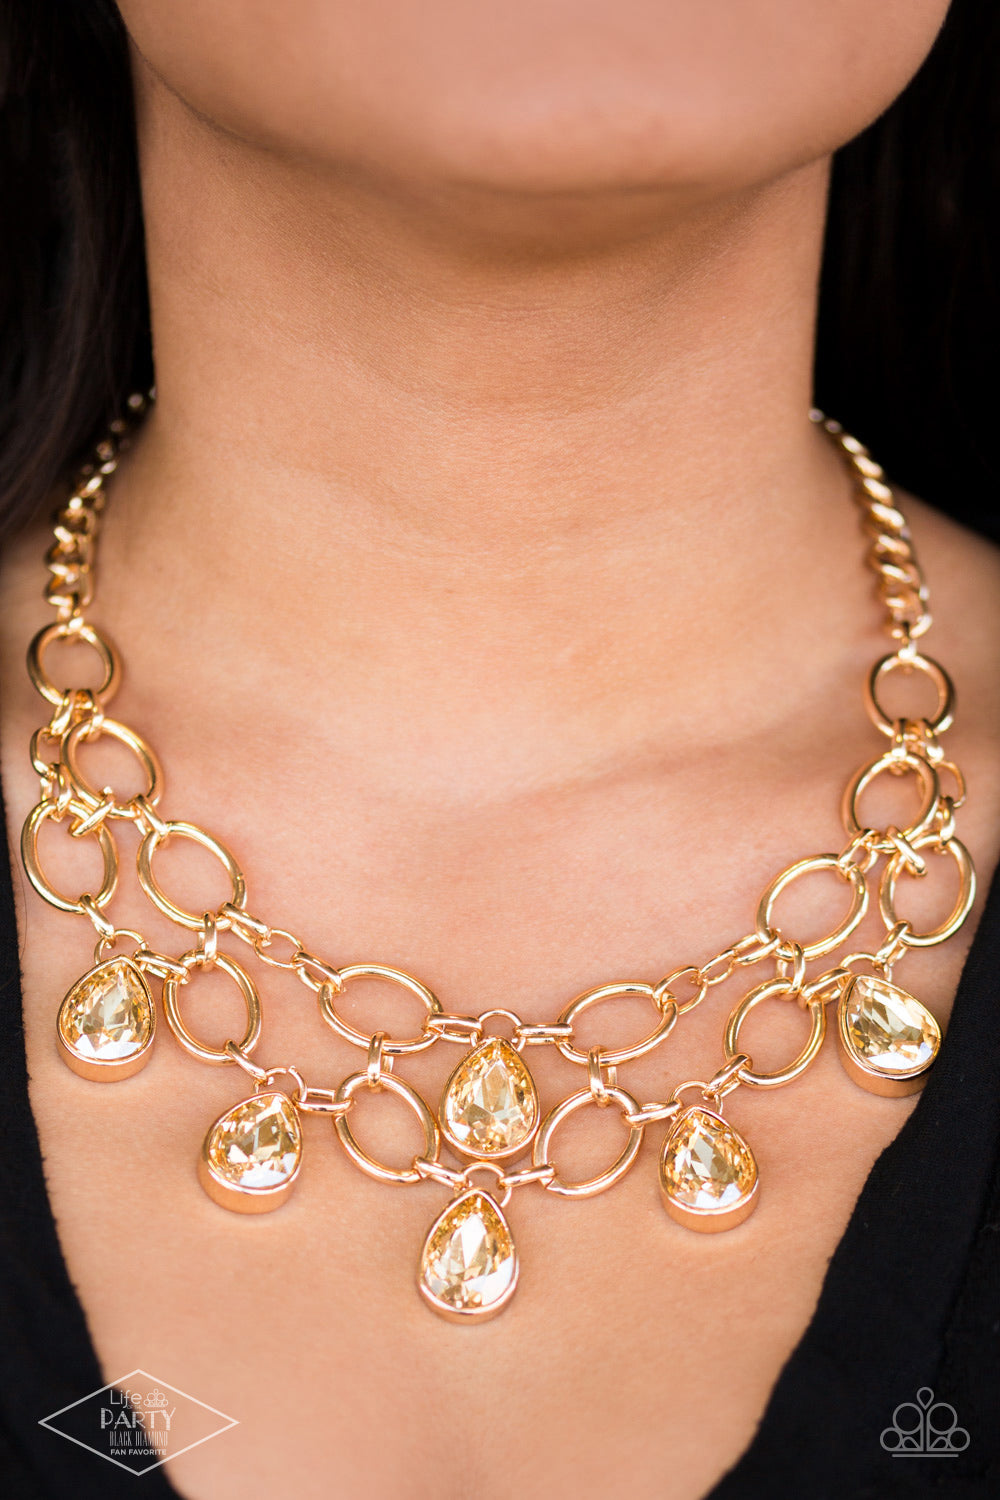 Show-Stopping Shimmer - Gold Link Necklaces joined by dainty gold links, two rows of dramatic gold chain layer below the collar in a fierce fashion. Golden teardrops drip from the glistening layers, adding a timeless shimmer to the show-stopping piece. Features an adjustable clasp closure.  Sold as one individual necklace. Includes one pair of matching earrings.